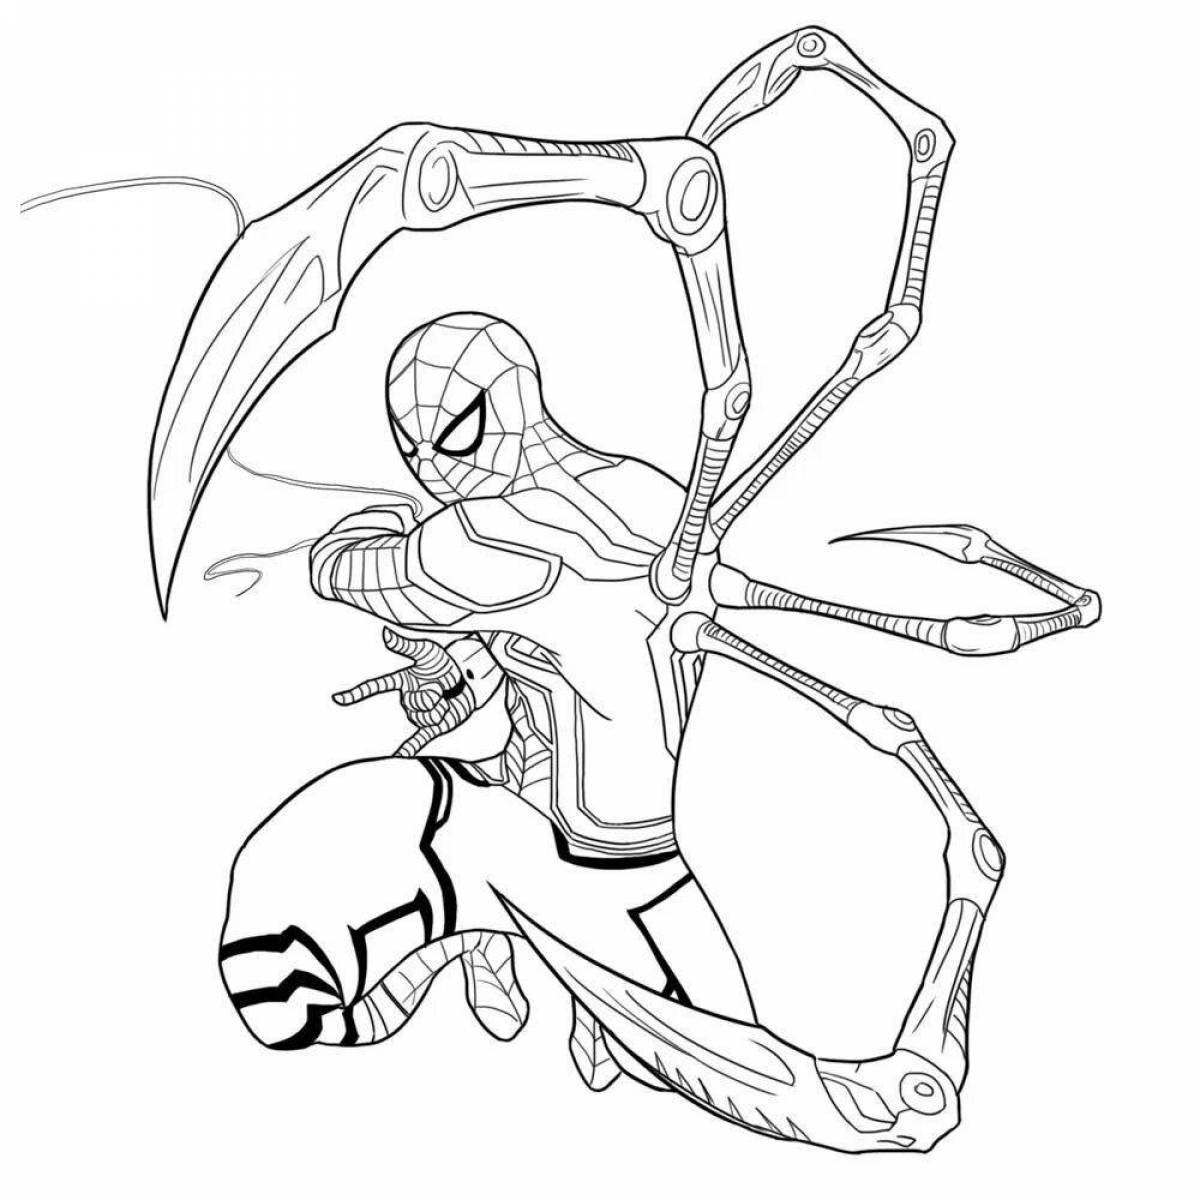 Spider-man glitter coloring page